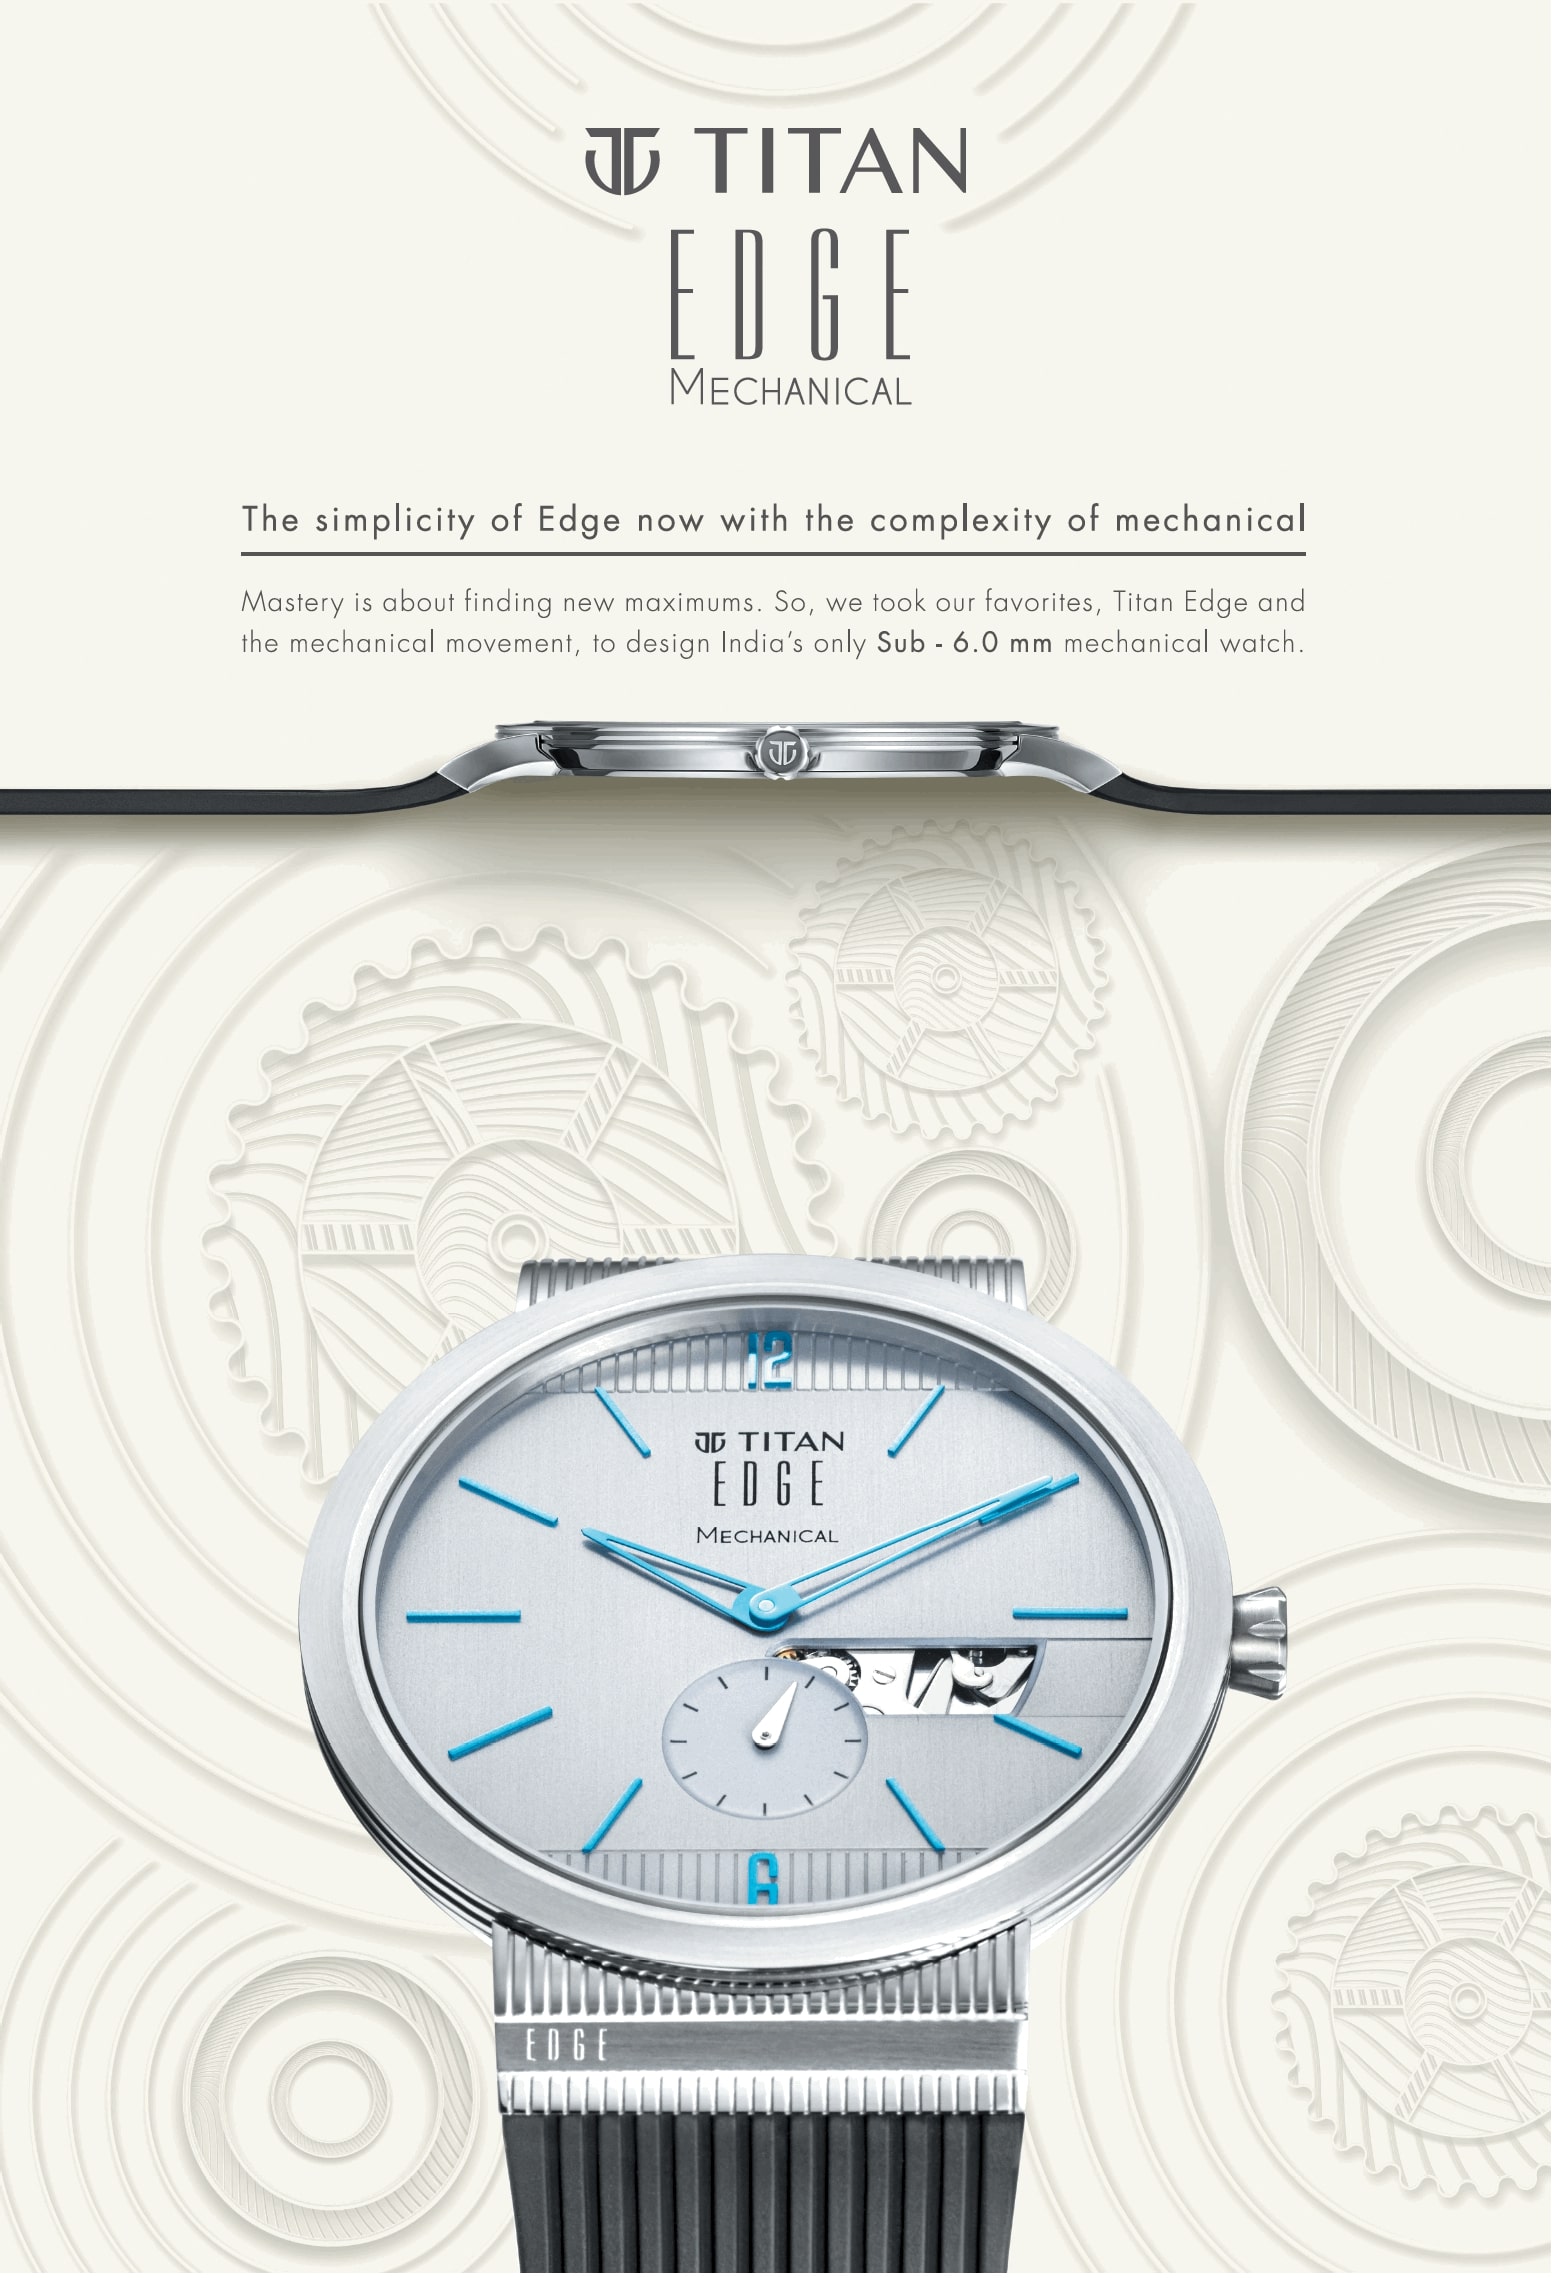 titan-edge-mechanical-the-simplicity-of-edge-now-with-the-complexity-of-mechanical-ad-times-of-india-mumbai-05-02-2021